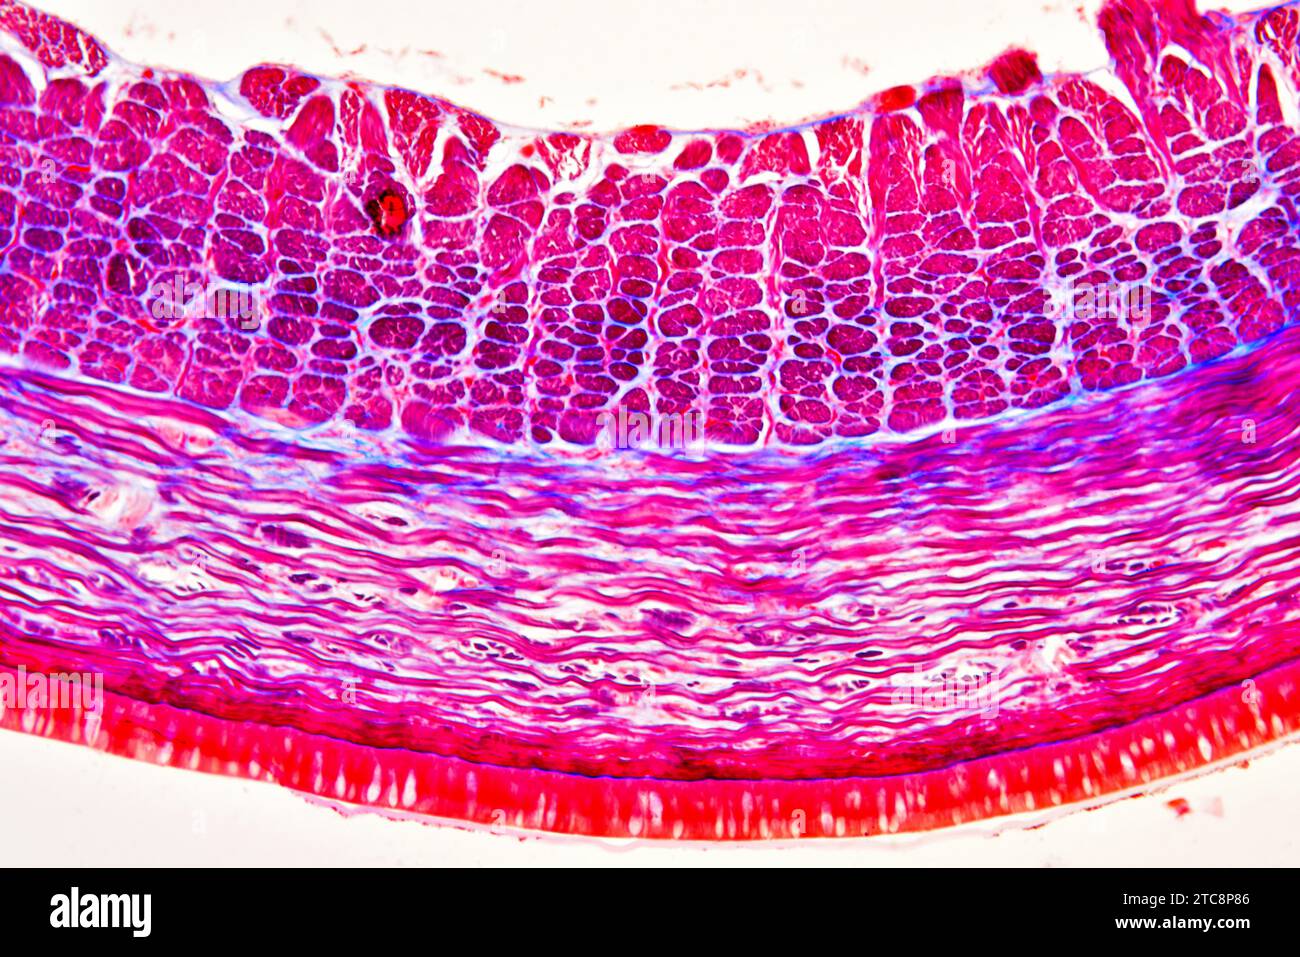 Earthworm (Oligochaeta) cross section showing cuticle, epidermis and circular and longitudinal muscles. Light microscope X150 at 10 cm wide. Stock Photo